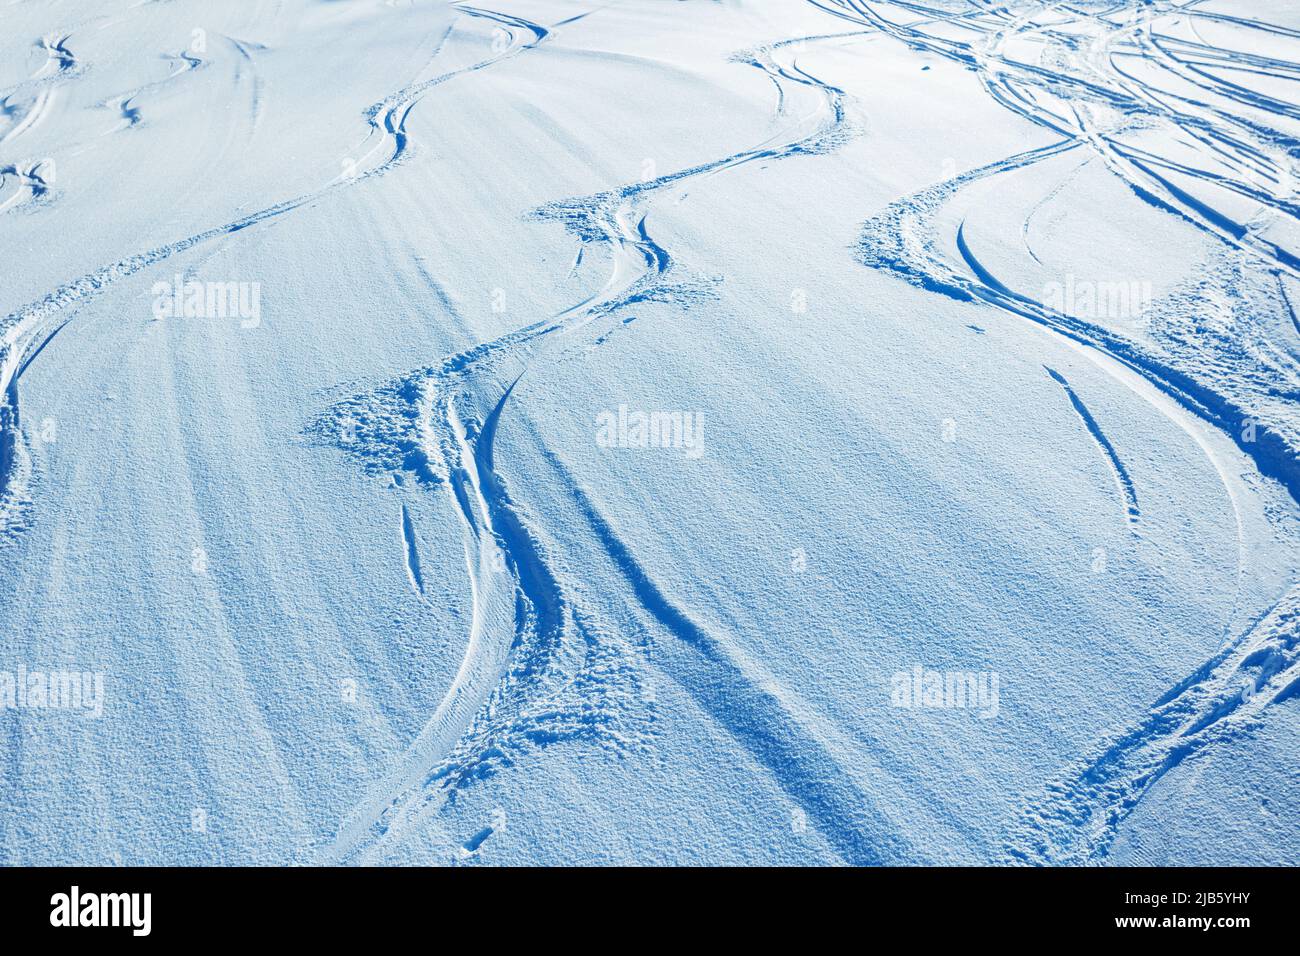 Traces of ski and snowboard in the snow view from above Stock Photo